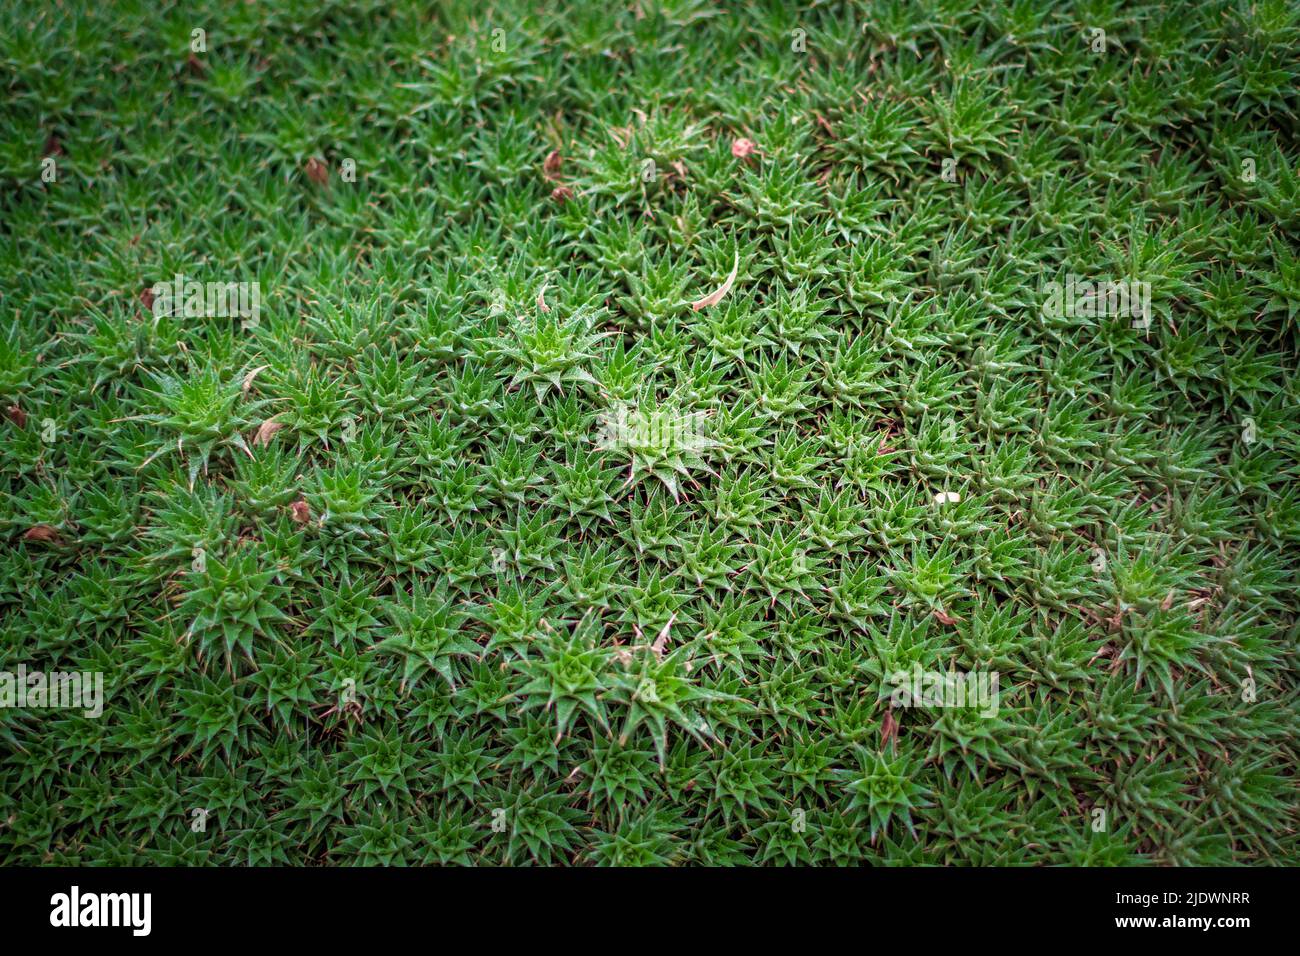 Deuterocohnia brevifolia or short-leaved bromeliad succulent plant used native to Bolivia and Argentina, used as ground cover in gardens. Stock Photo